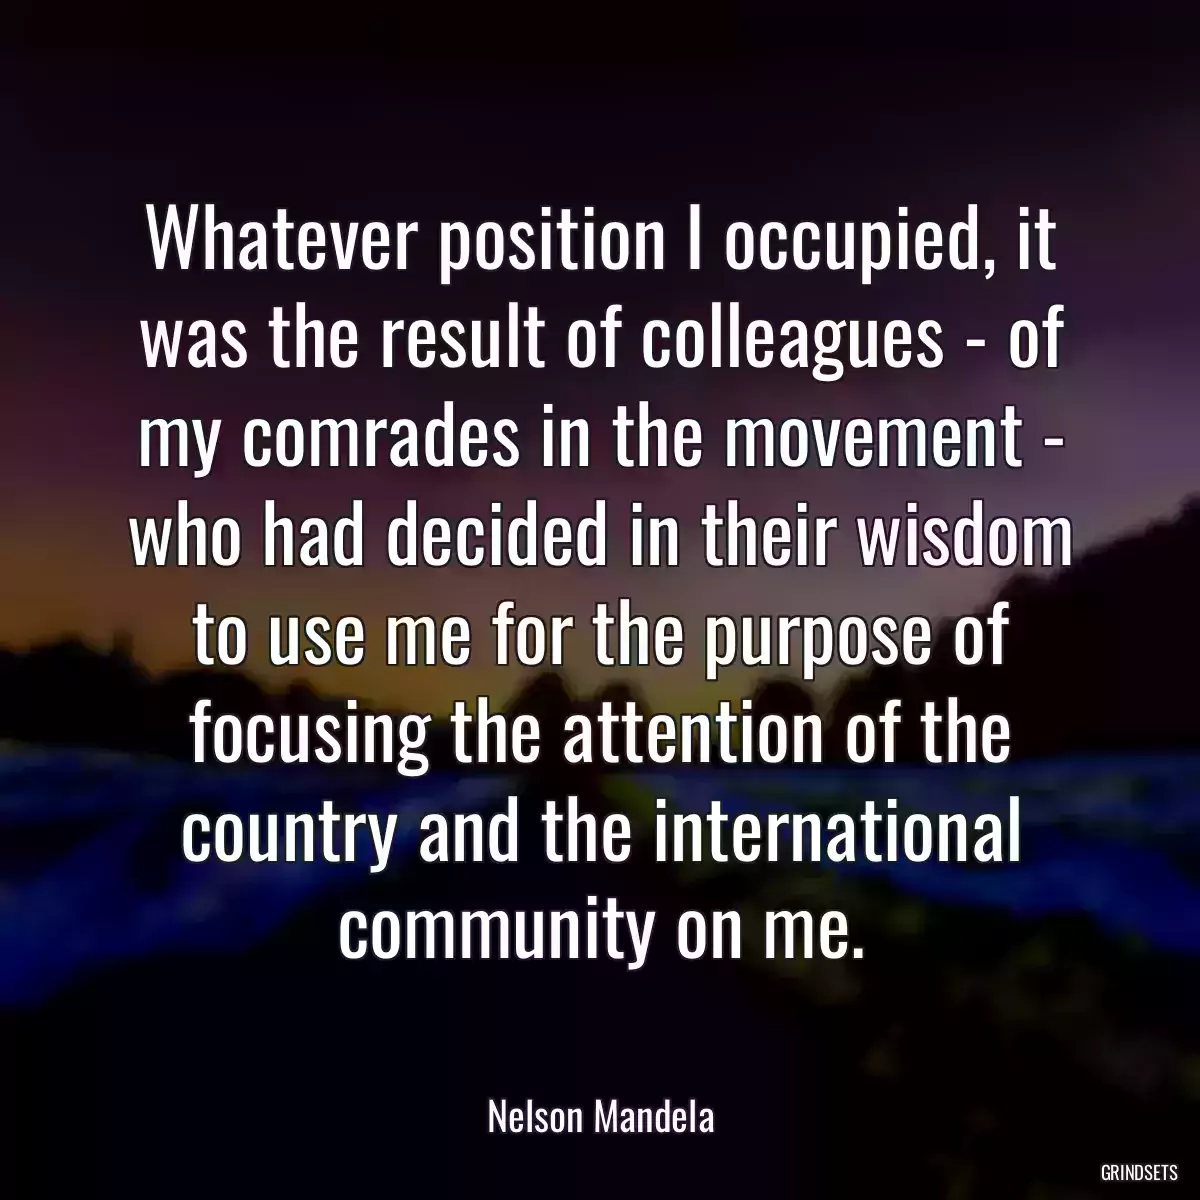 Whatever position I occupied, it was the result of colleagues - of my comrades in the movement - who had decided in their wisdom to use me for the purpose of focusing the attention of the country and the international community on me.